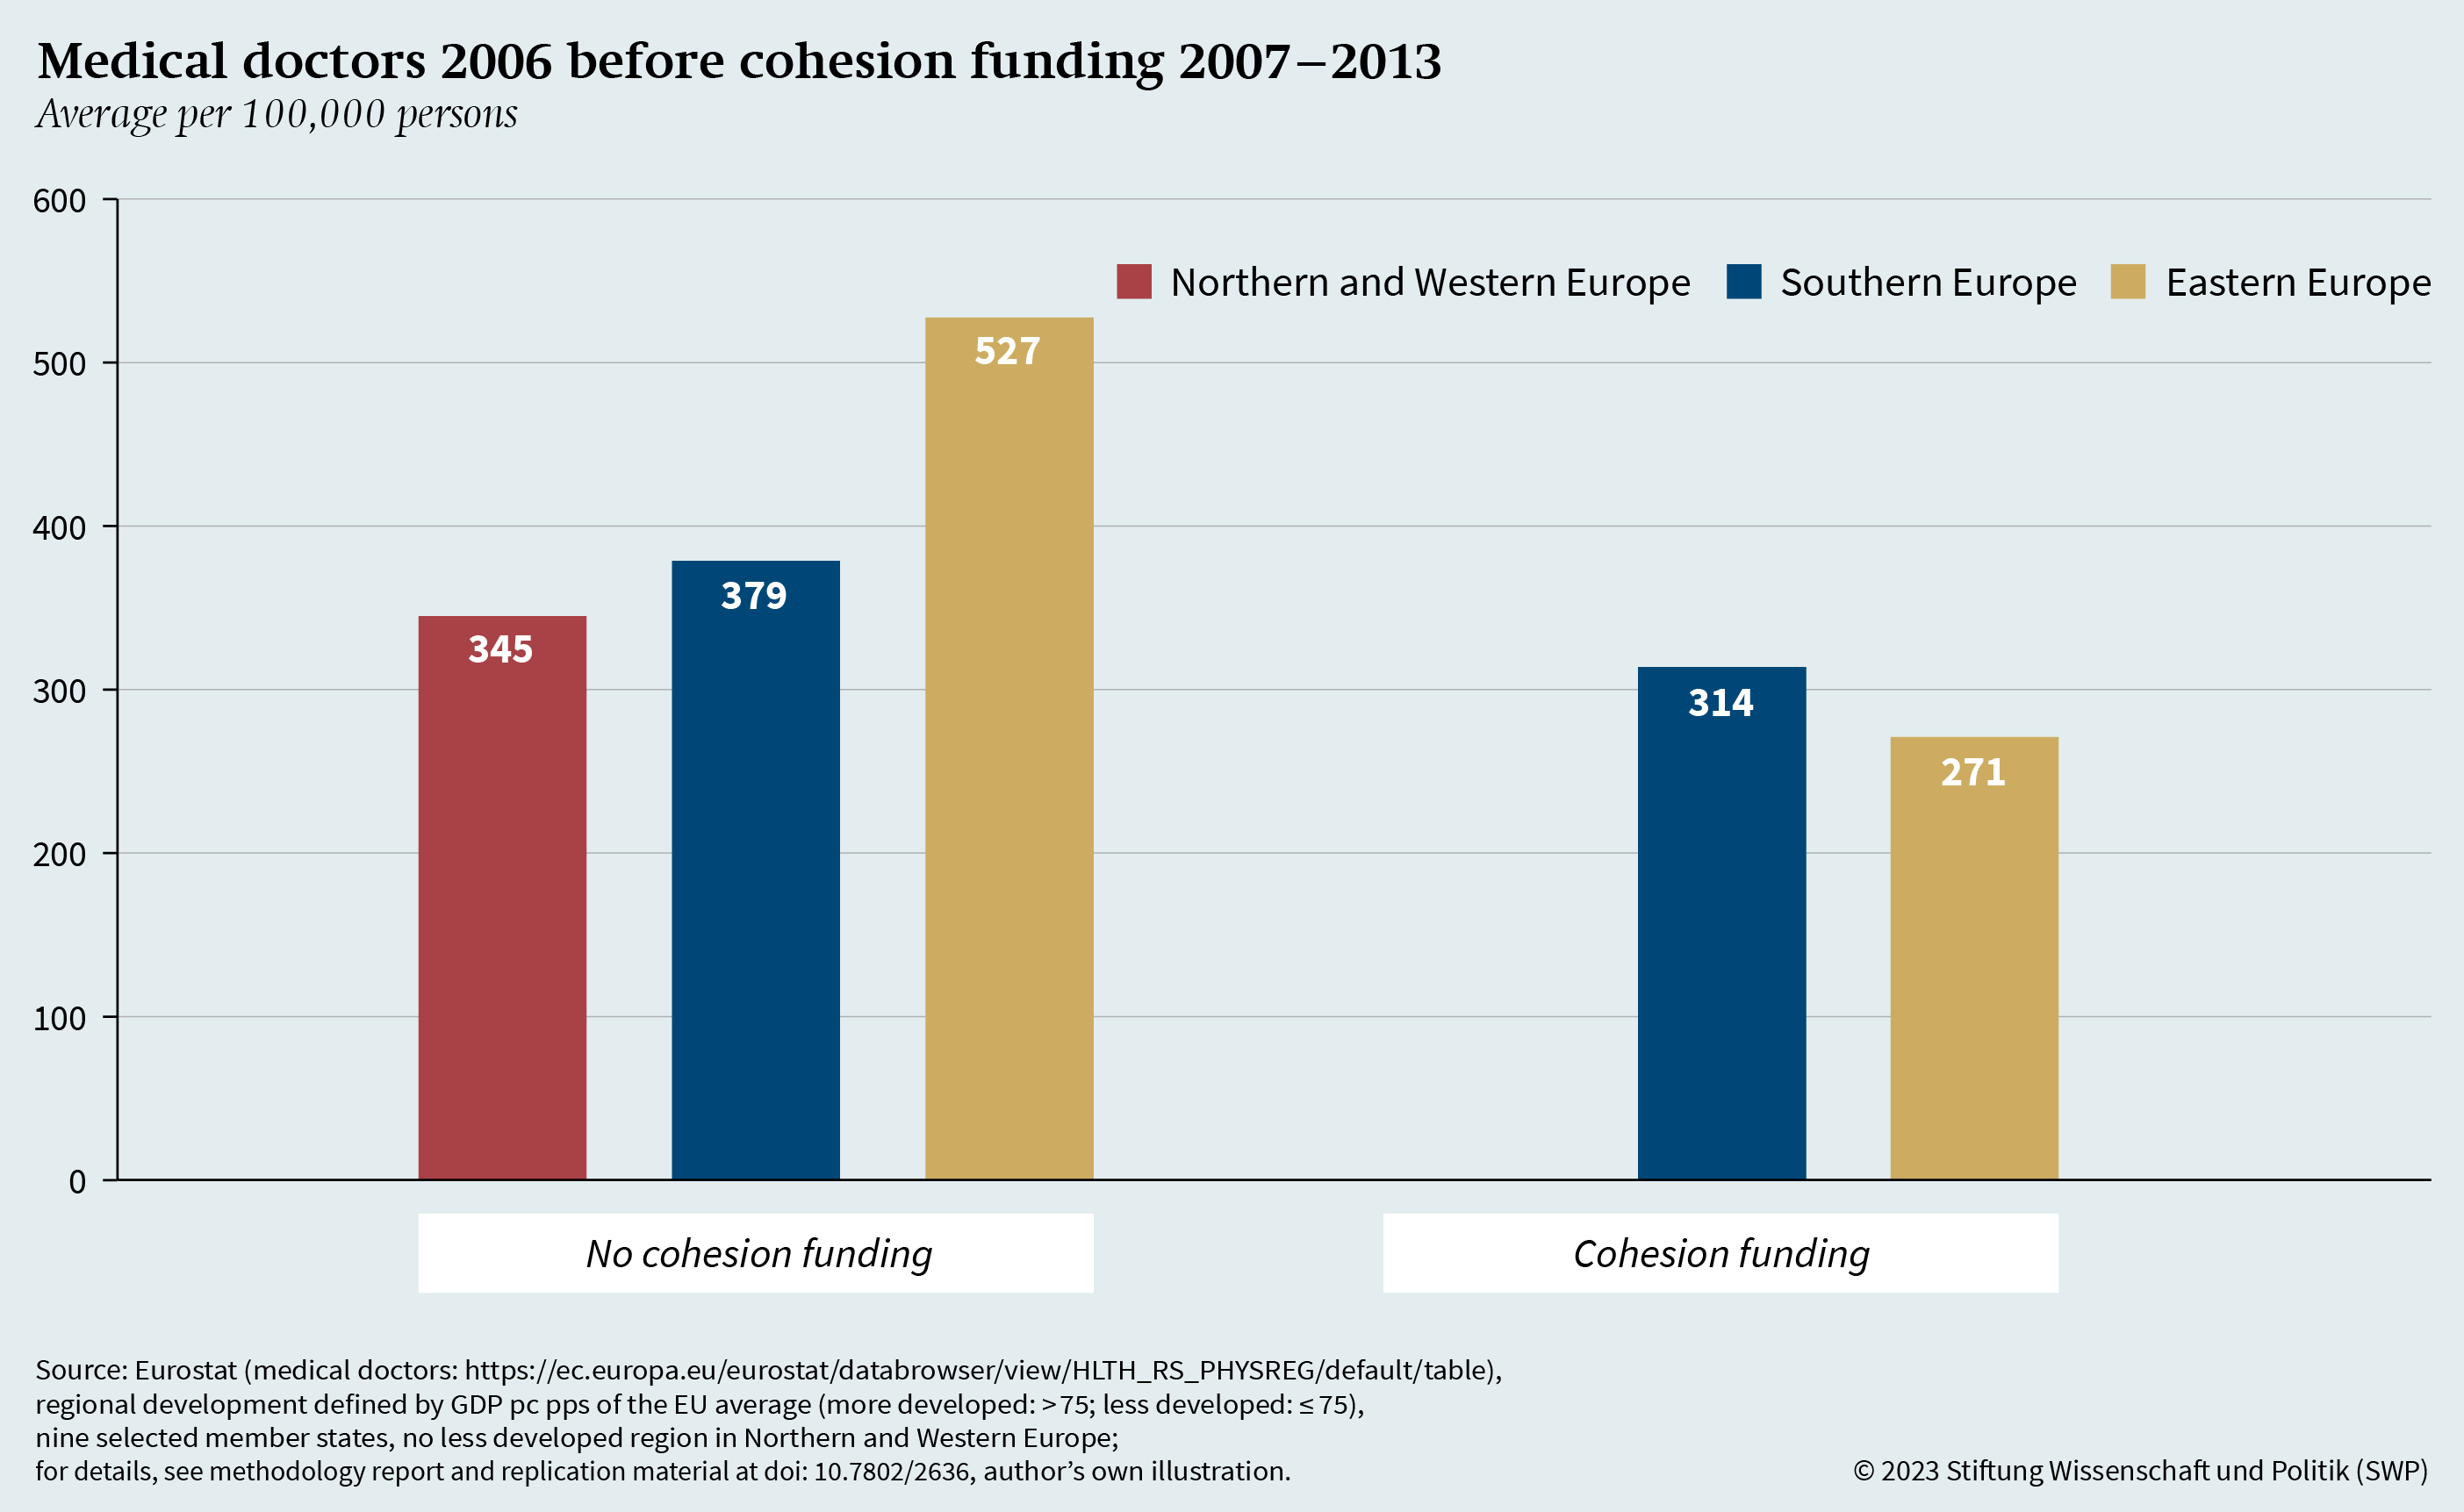 Figure A.5: Medical doctors 2006 before cohesion funding 2007–2013